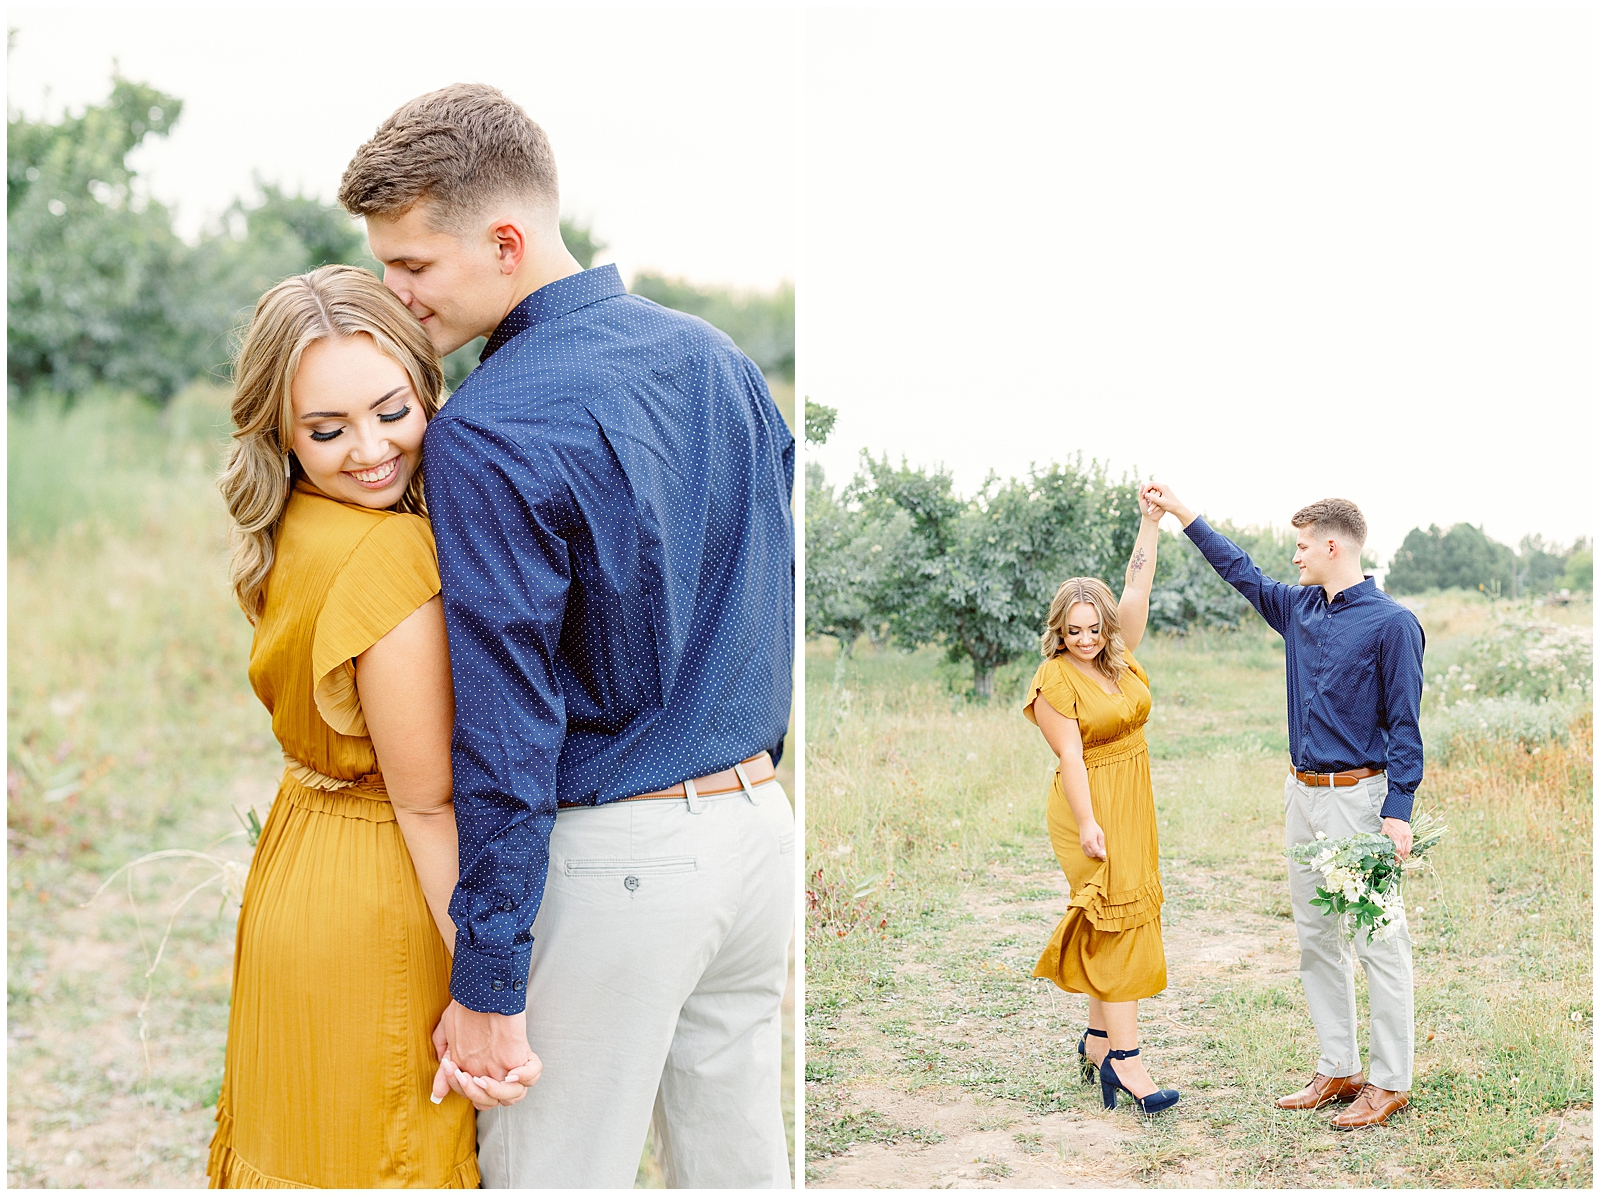 Summer Orchard Engagement Session in Boise Idaho